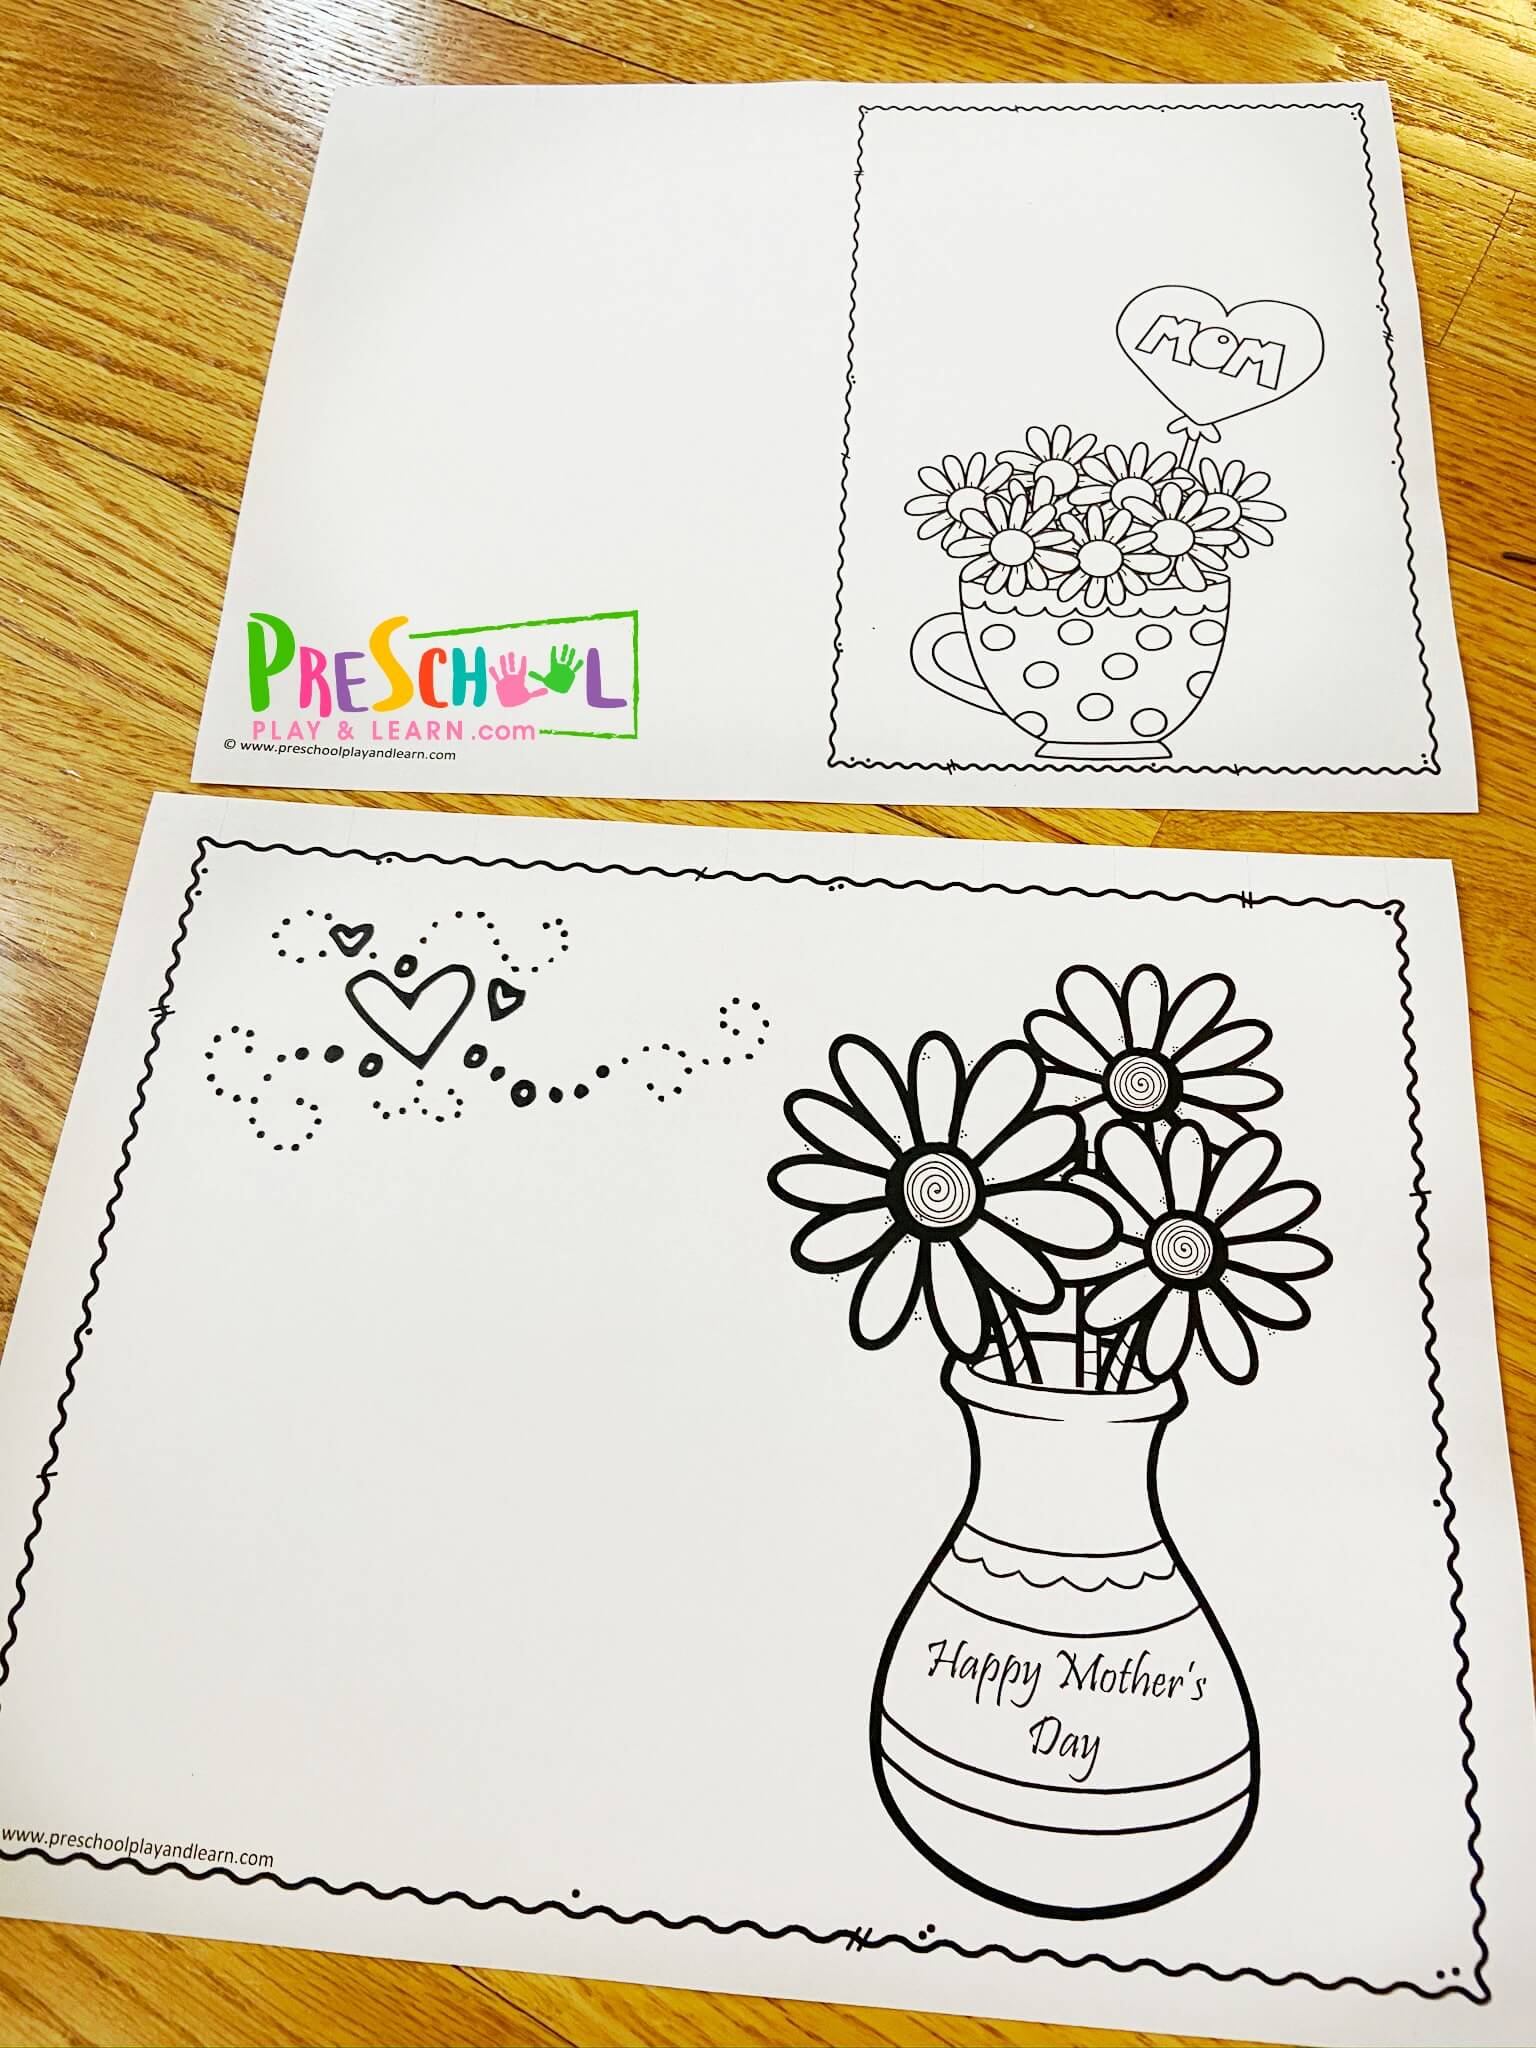 FREE Printable Homemade Mothers Day Cards to Color pdf